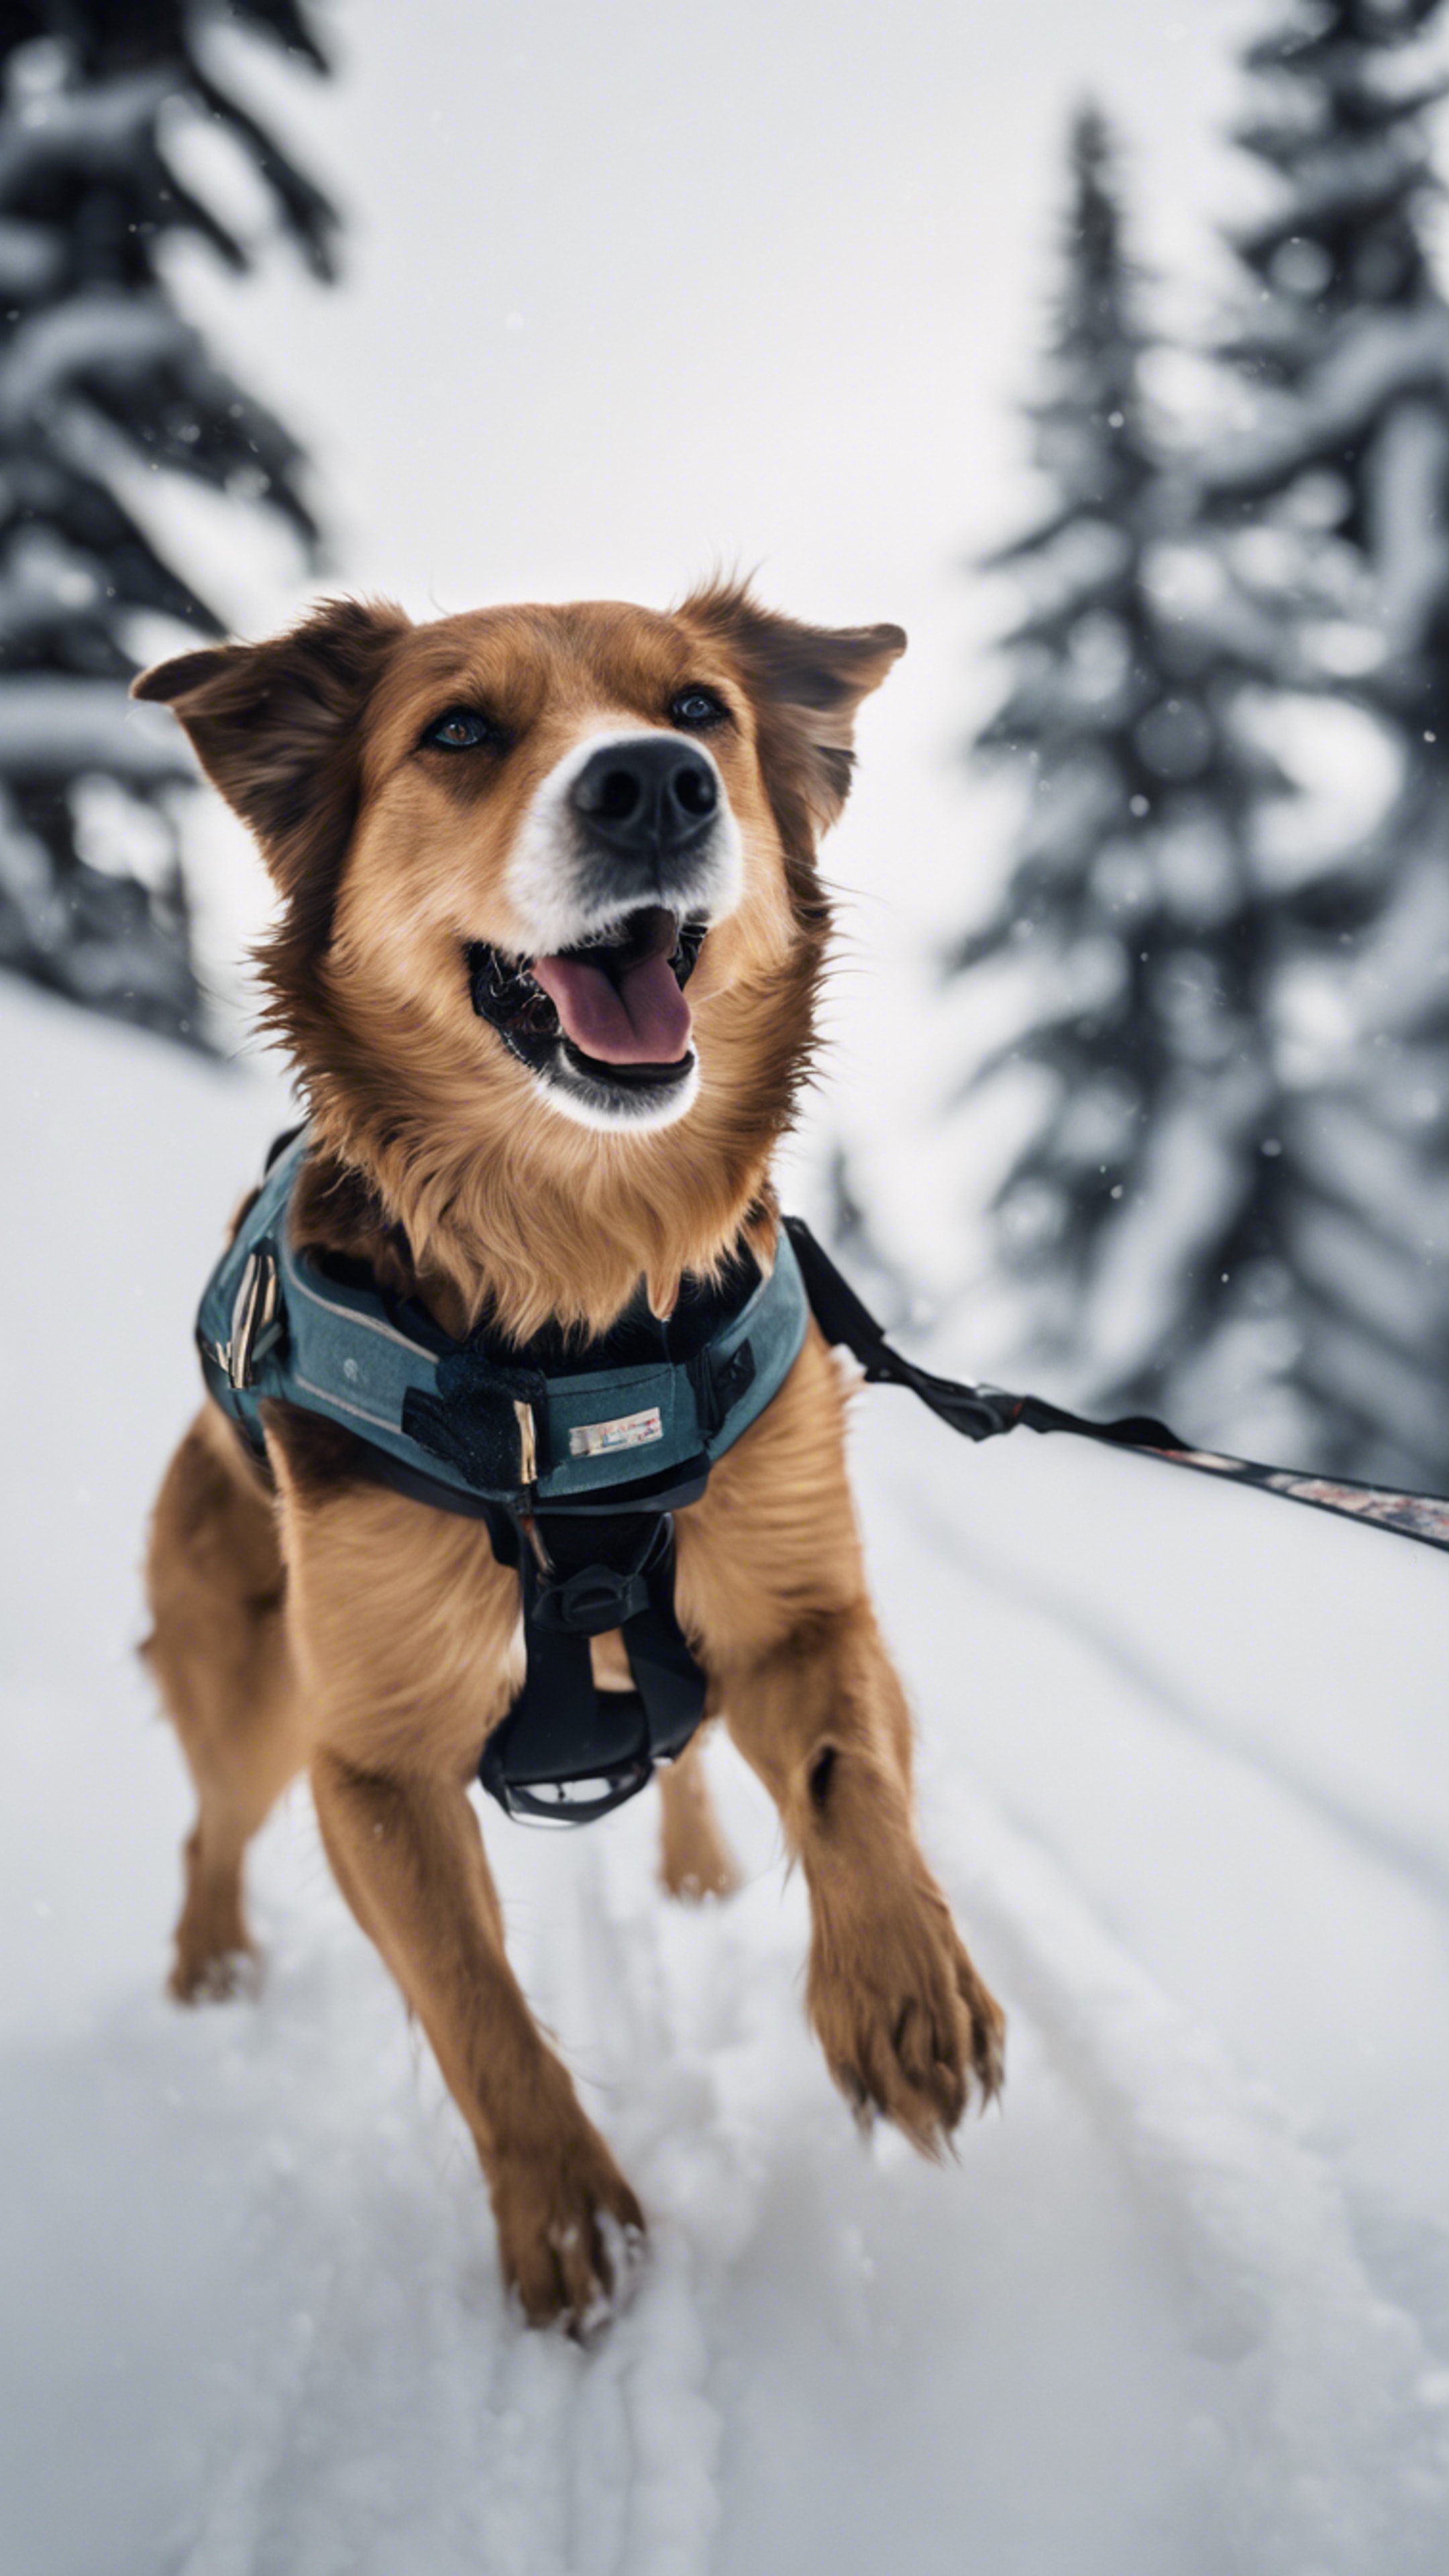 An excited dog happily following a snowboarder down a snowy mountain trail.壁紙[cbd28fba8a9041da9089]